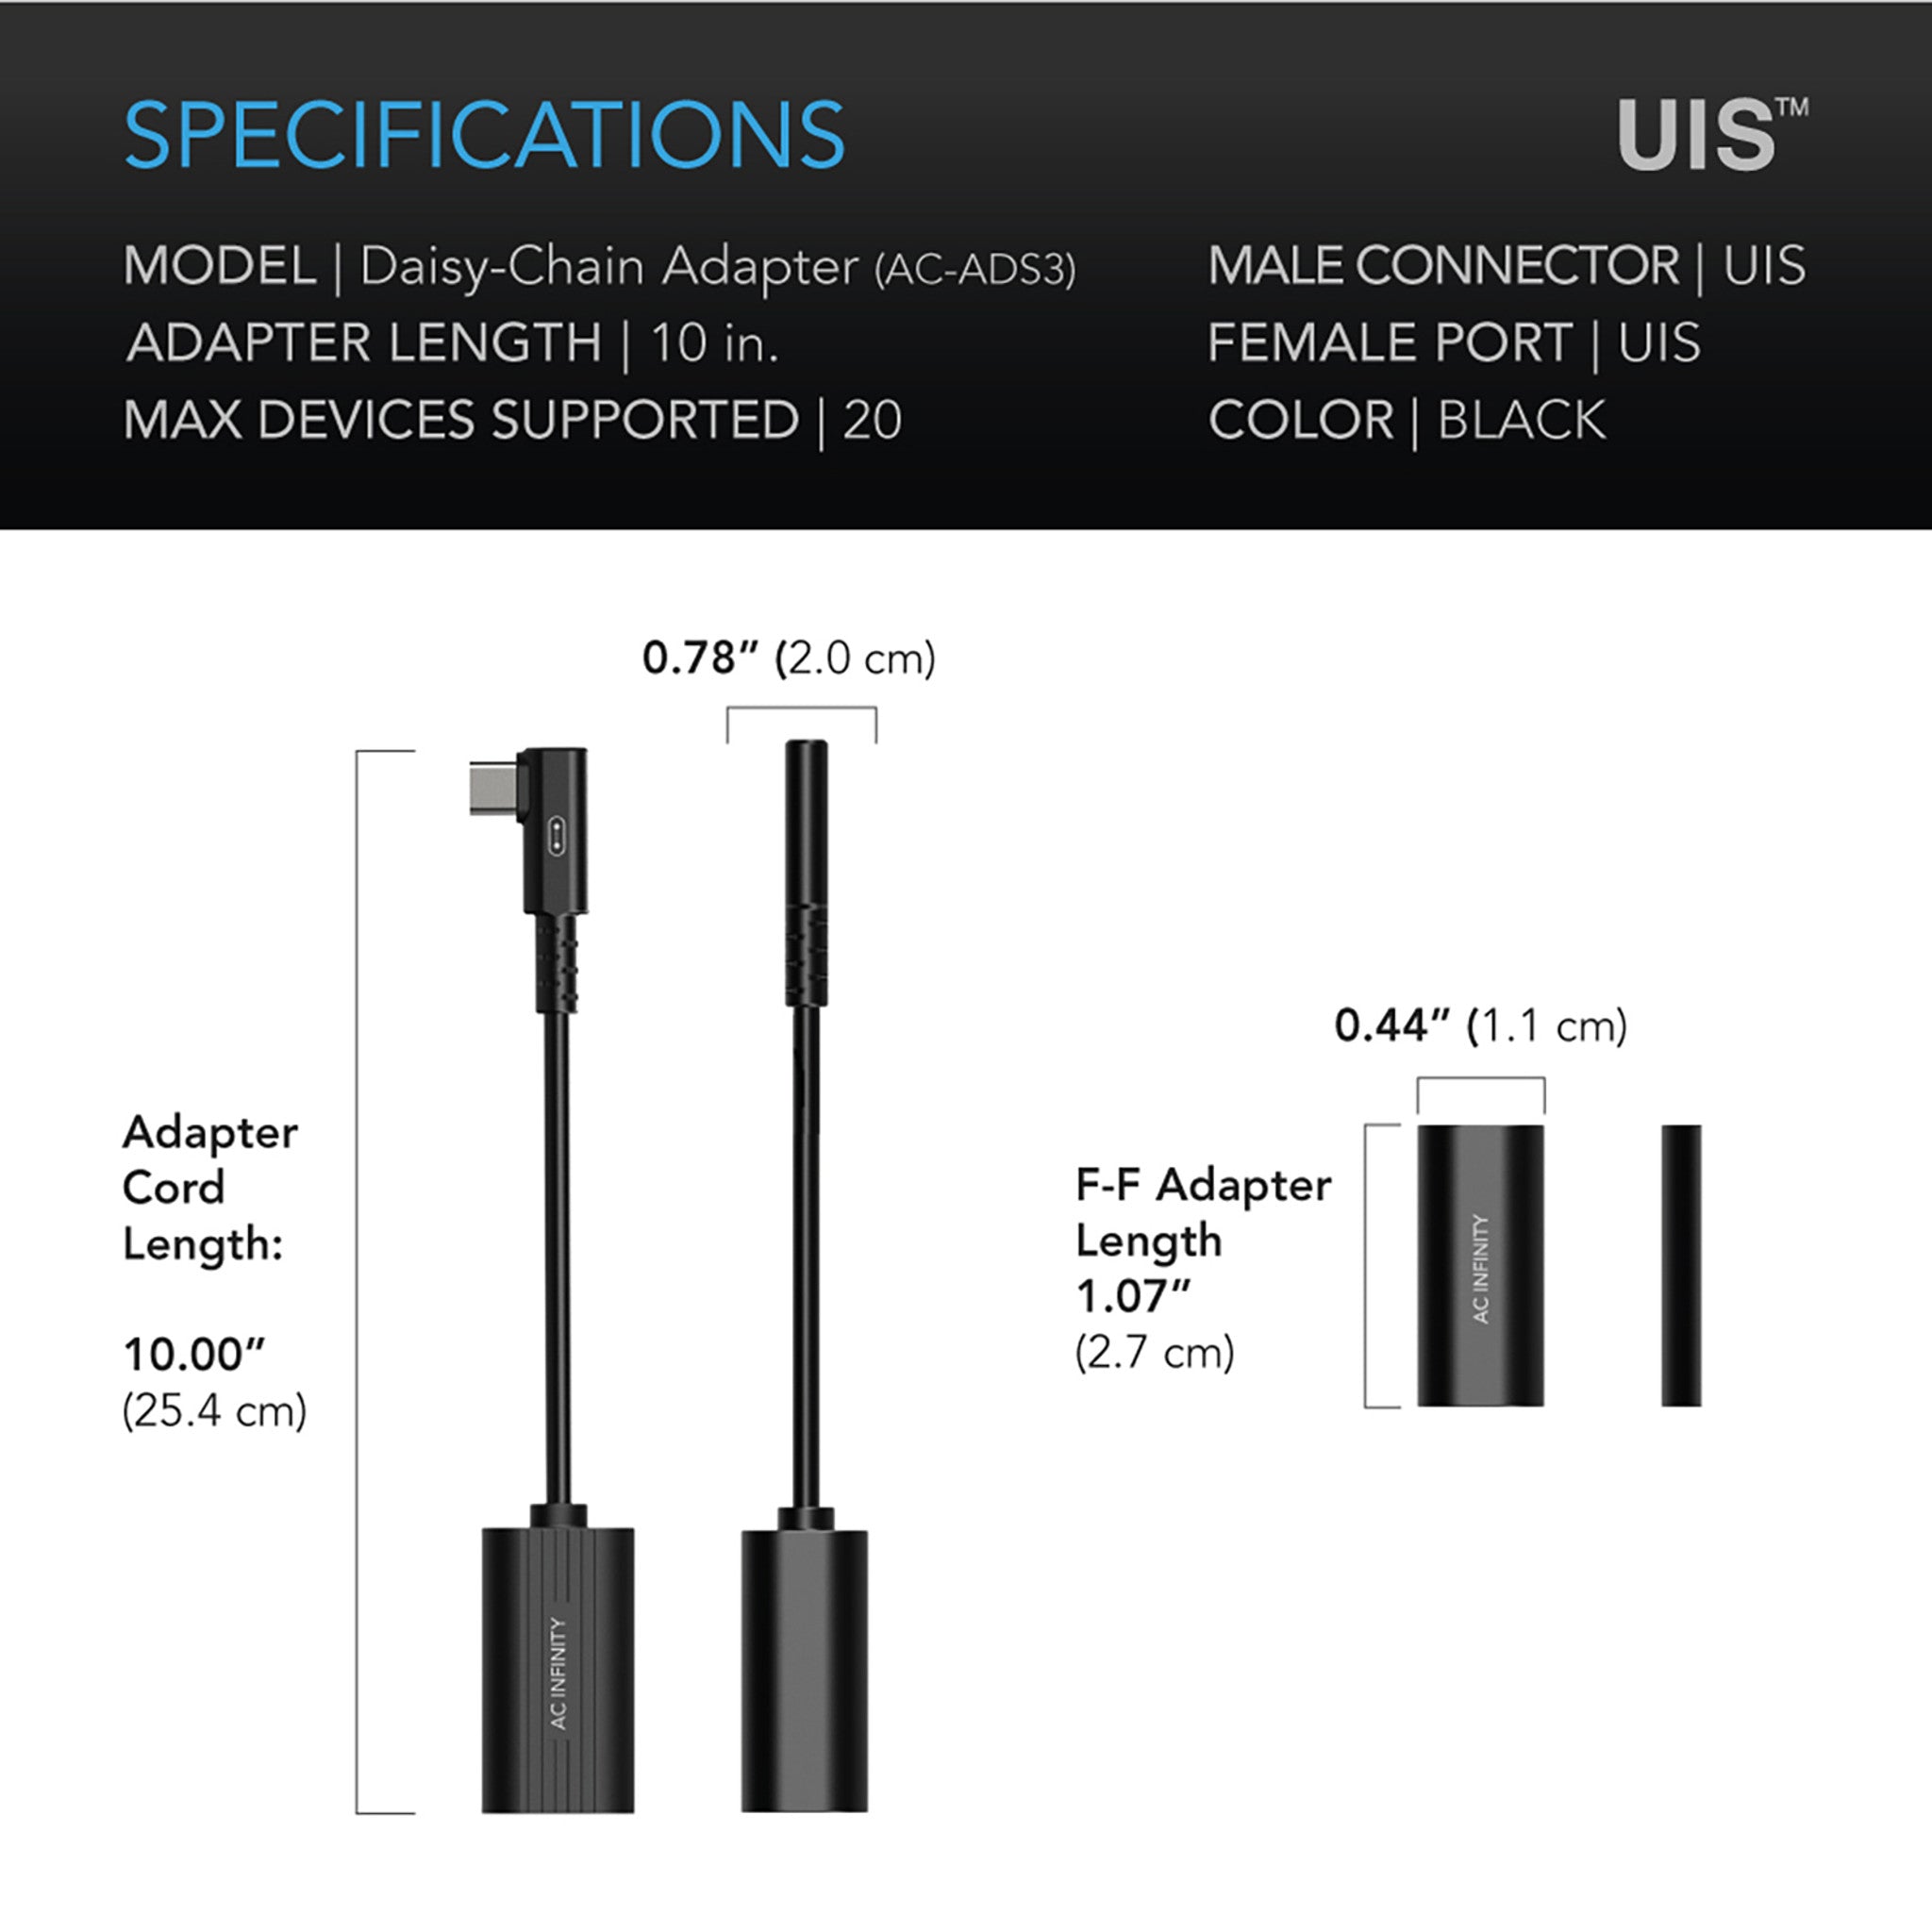 UIS 2-IN-1 Splitter, Daisy-Chain Adapter Dongle